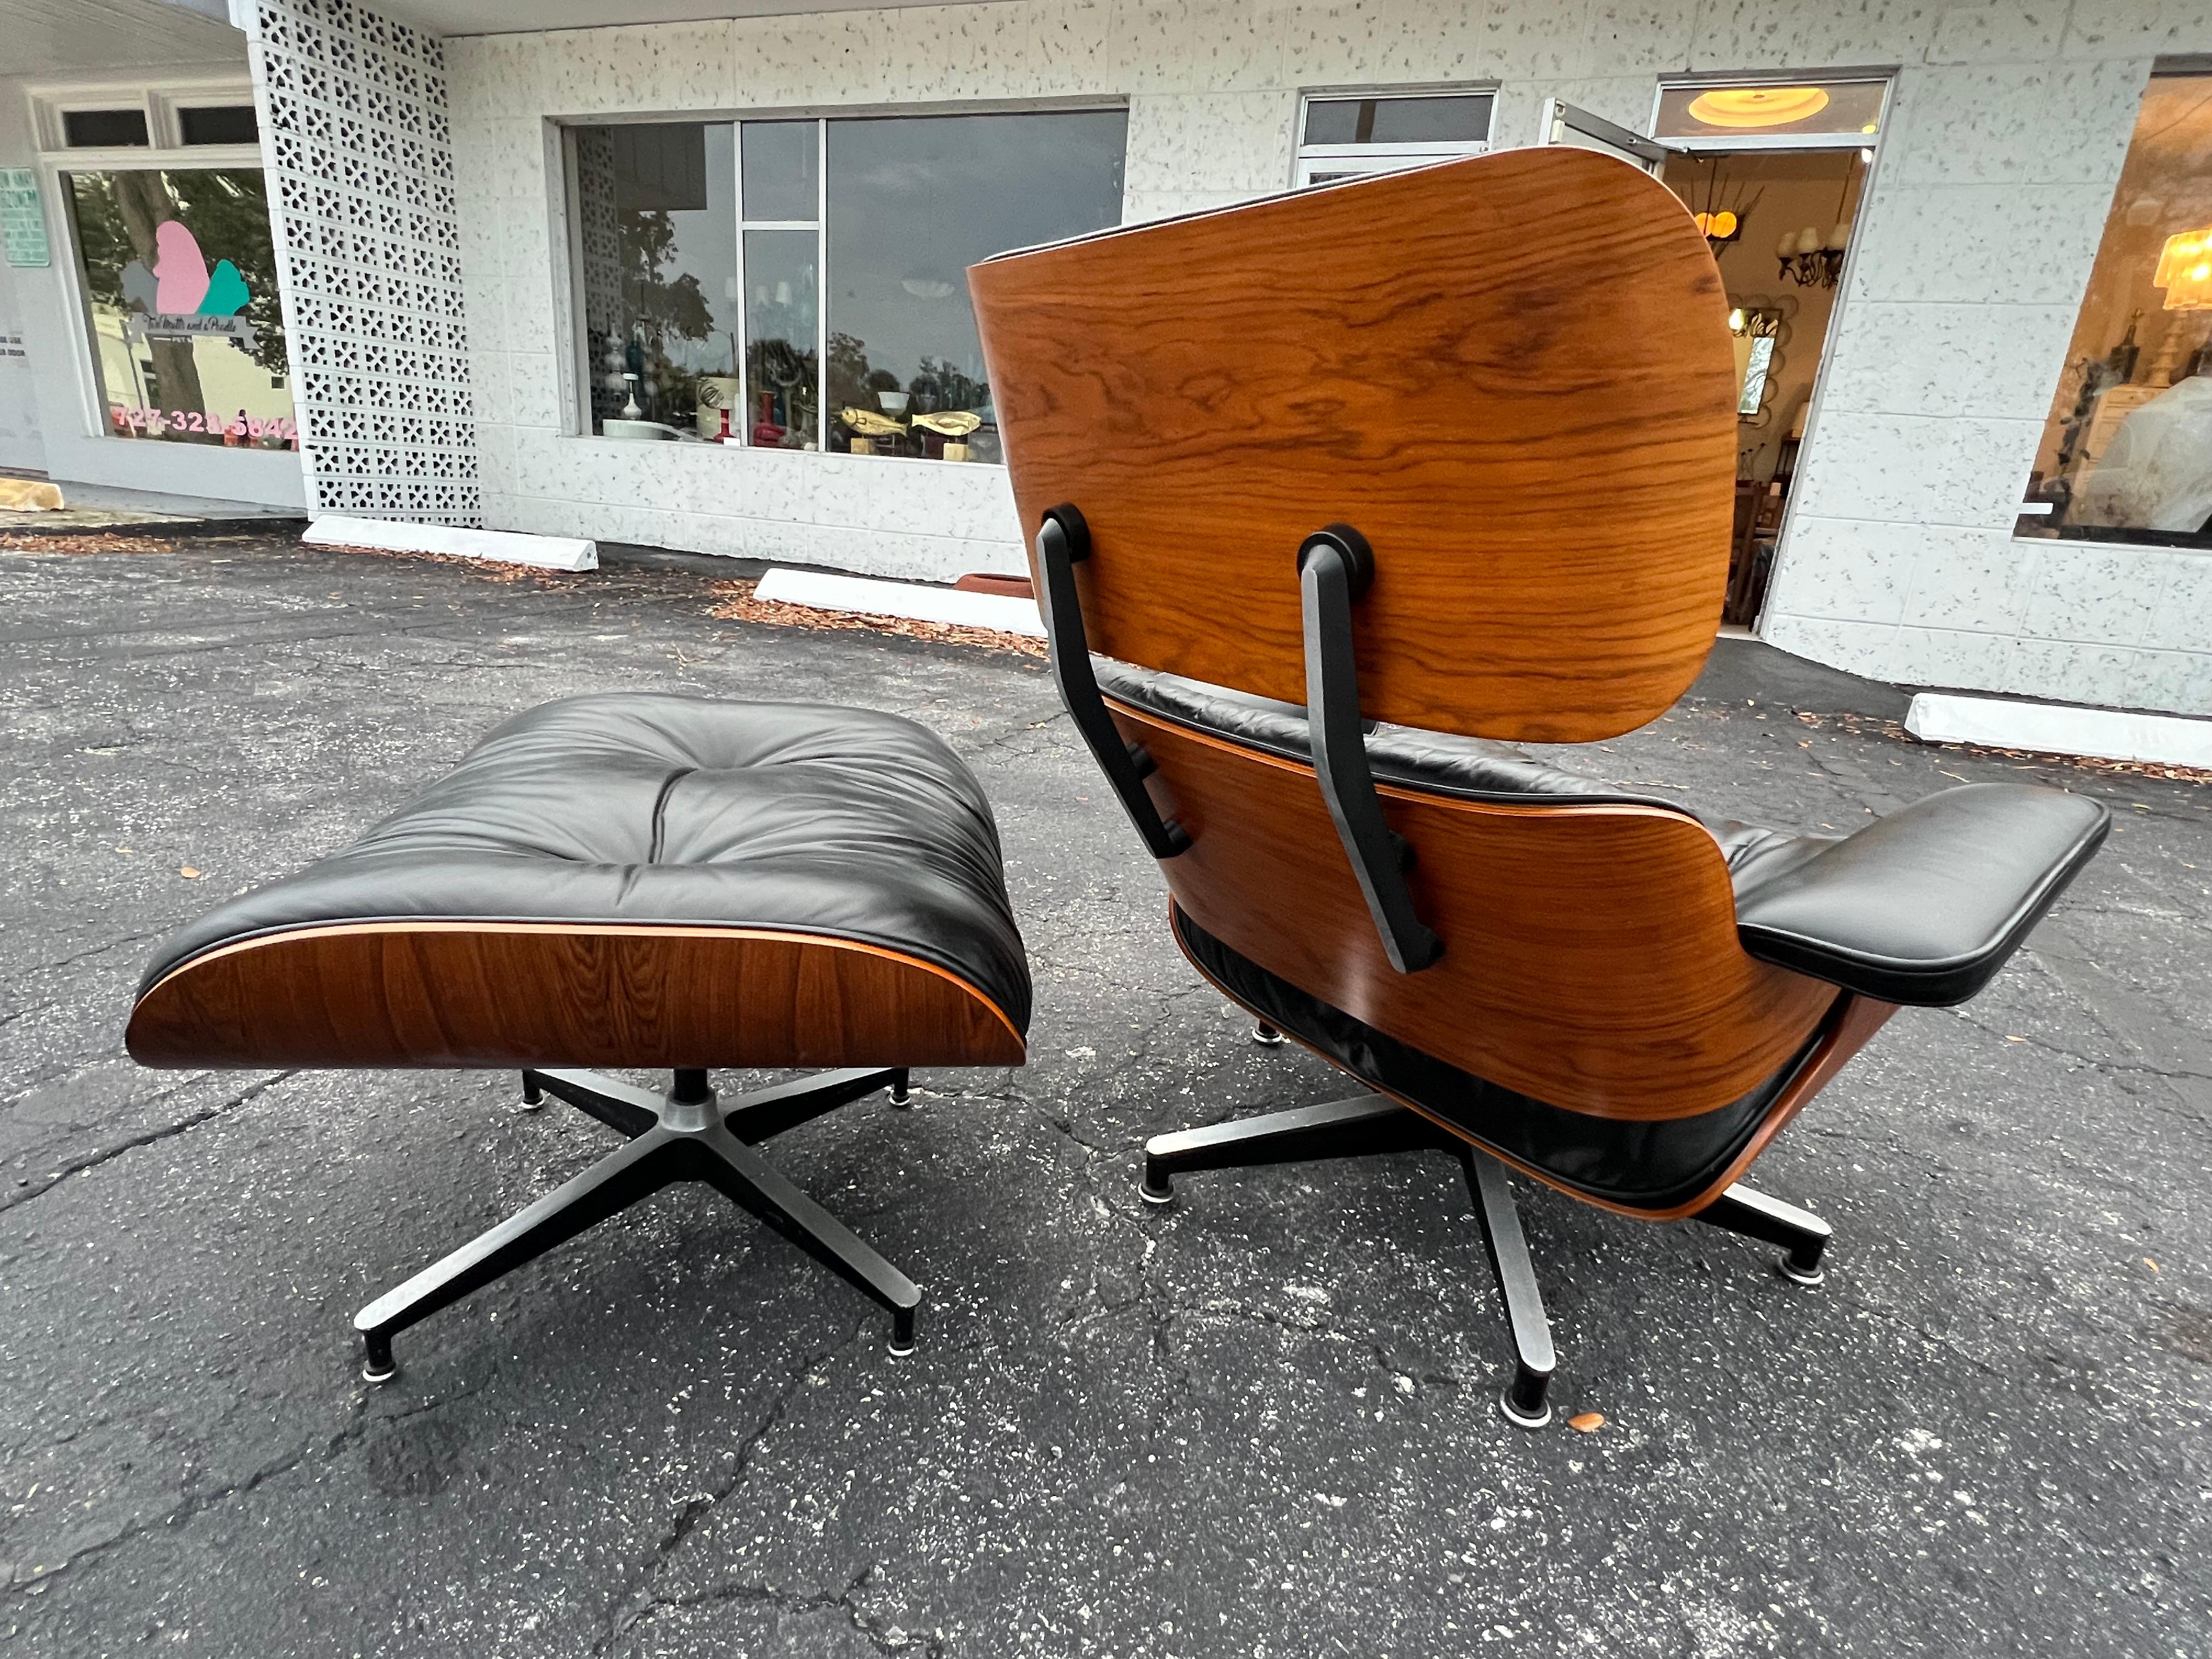 Beautiful Charles Eames, Herman Miller lounger chair and ottoman, 1980's. Original black leather and rosewood with nice graining. The chair has a lightly worn feel with lovely patina. 